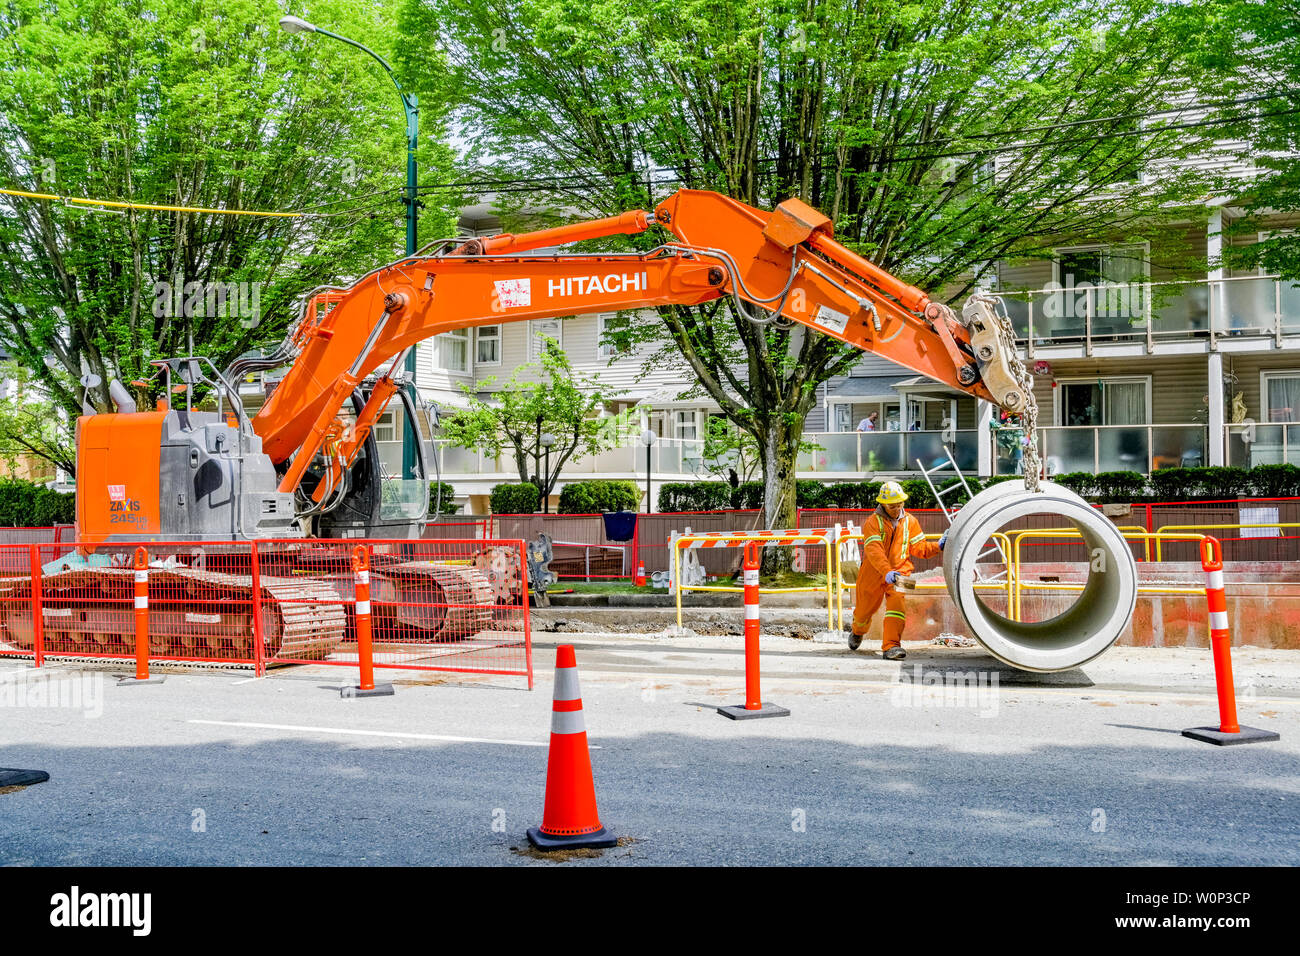 Concrete sewer infrastructure installation, Vancouver, British Columbia, Canada Stock Photo